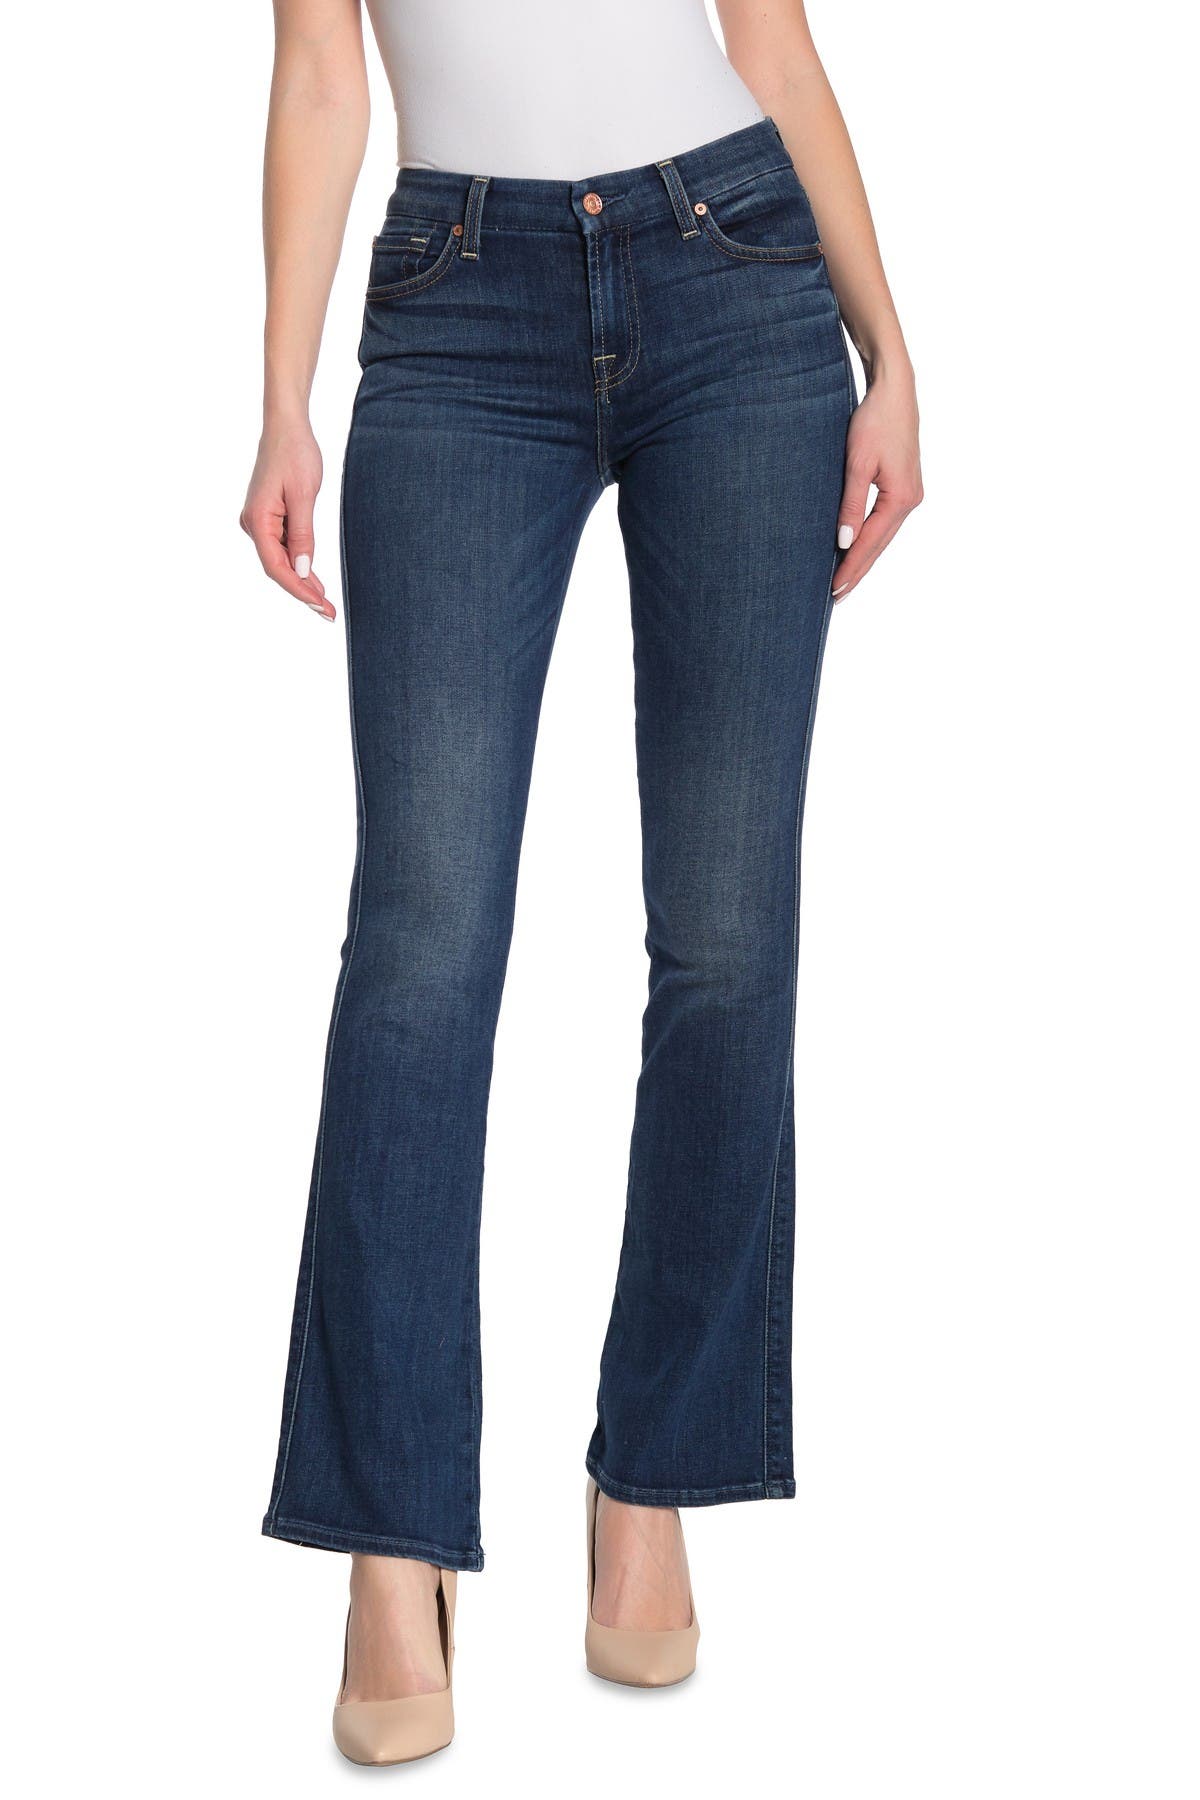 7 for all mankind mens bootcut jeans